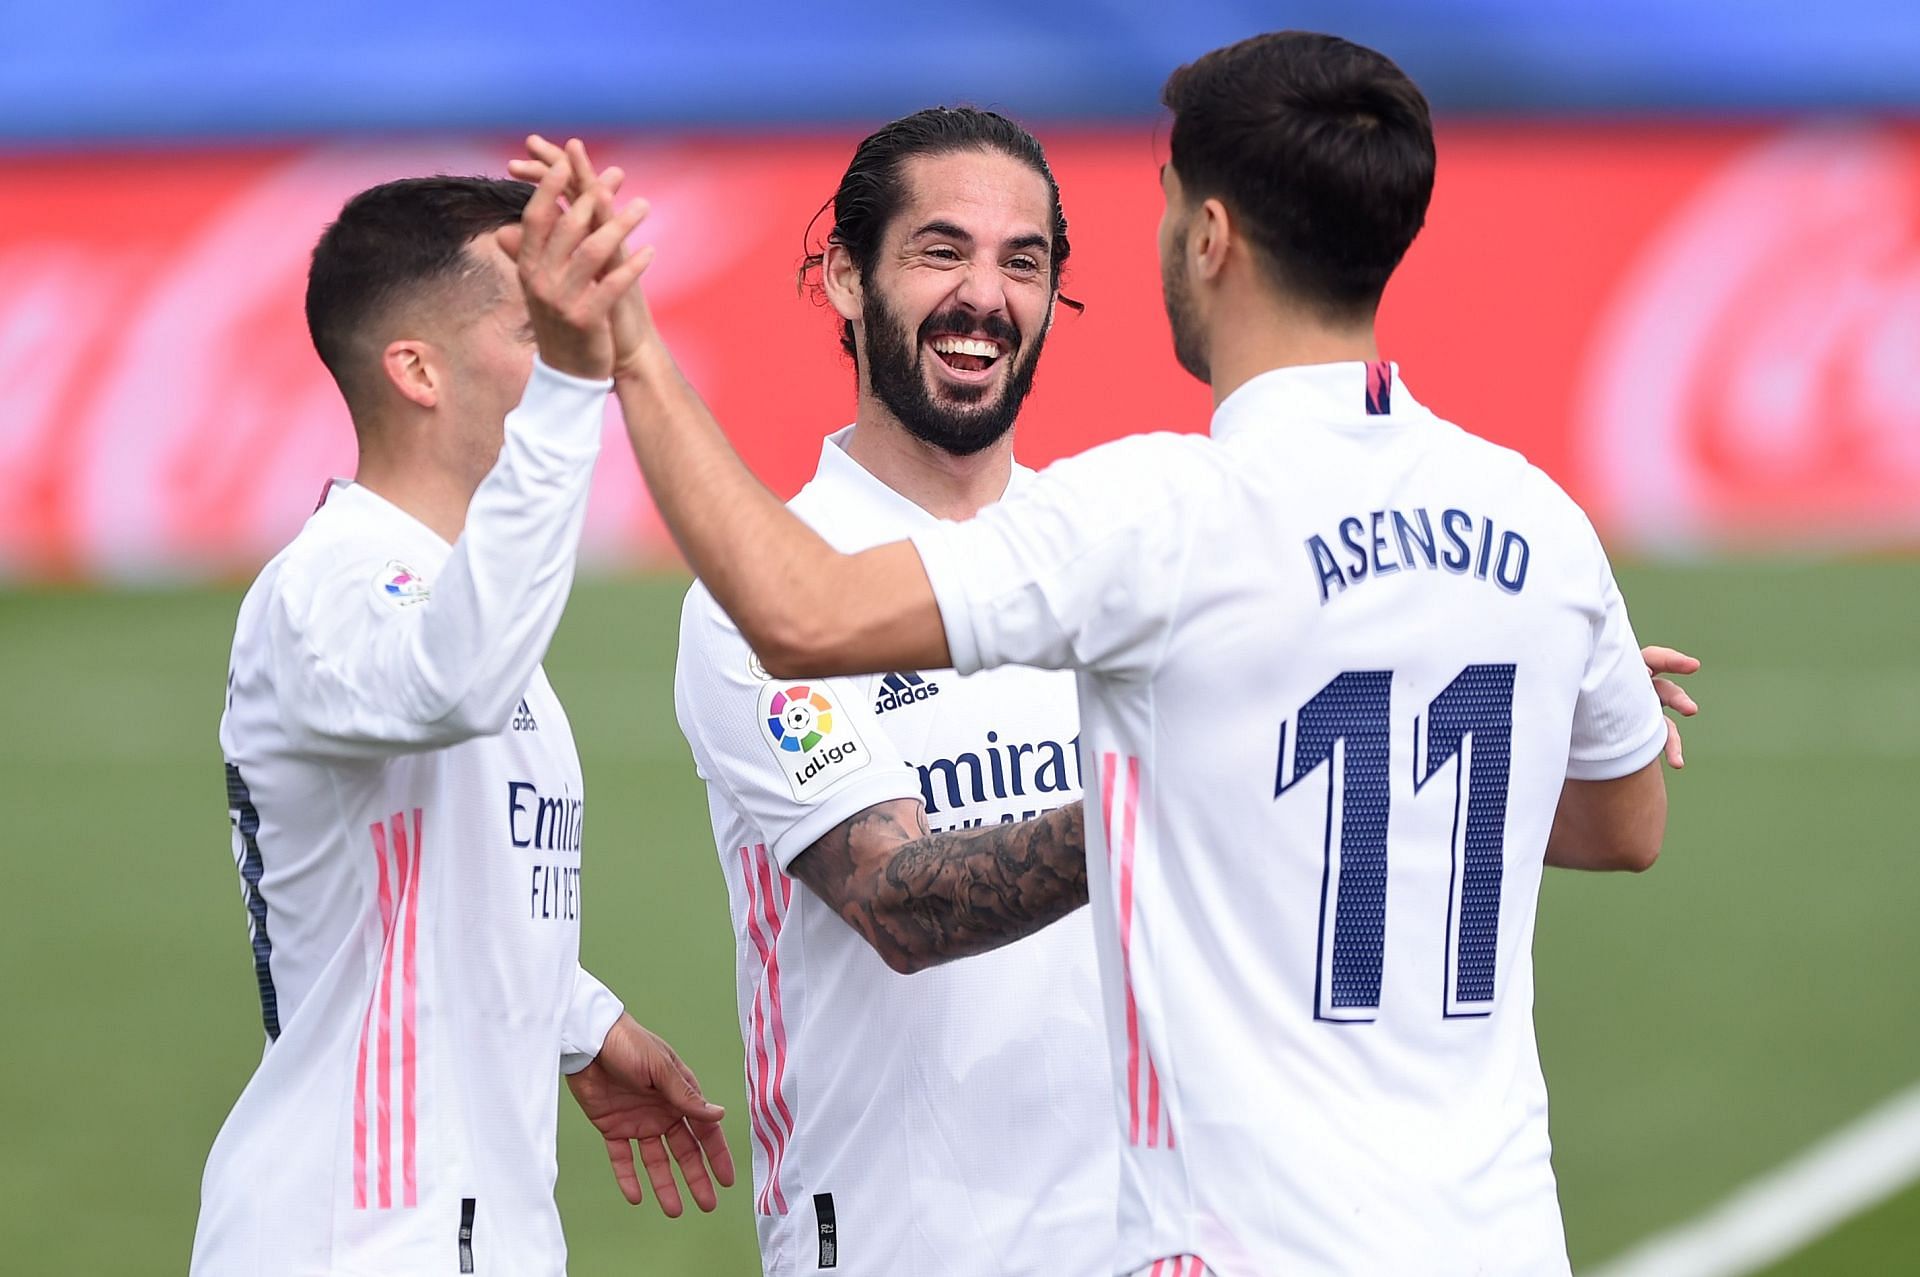 Isco failed to live up to his expectations for Real Madrid